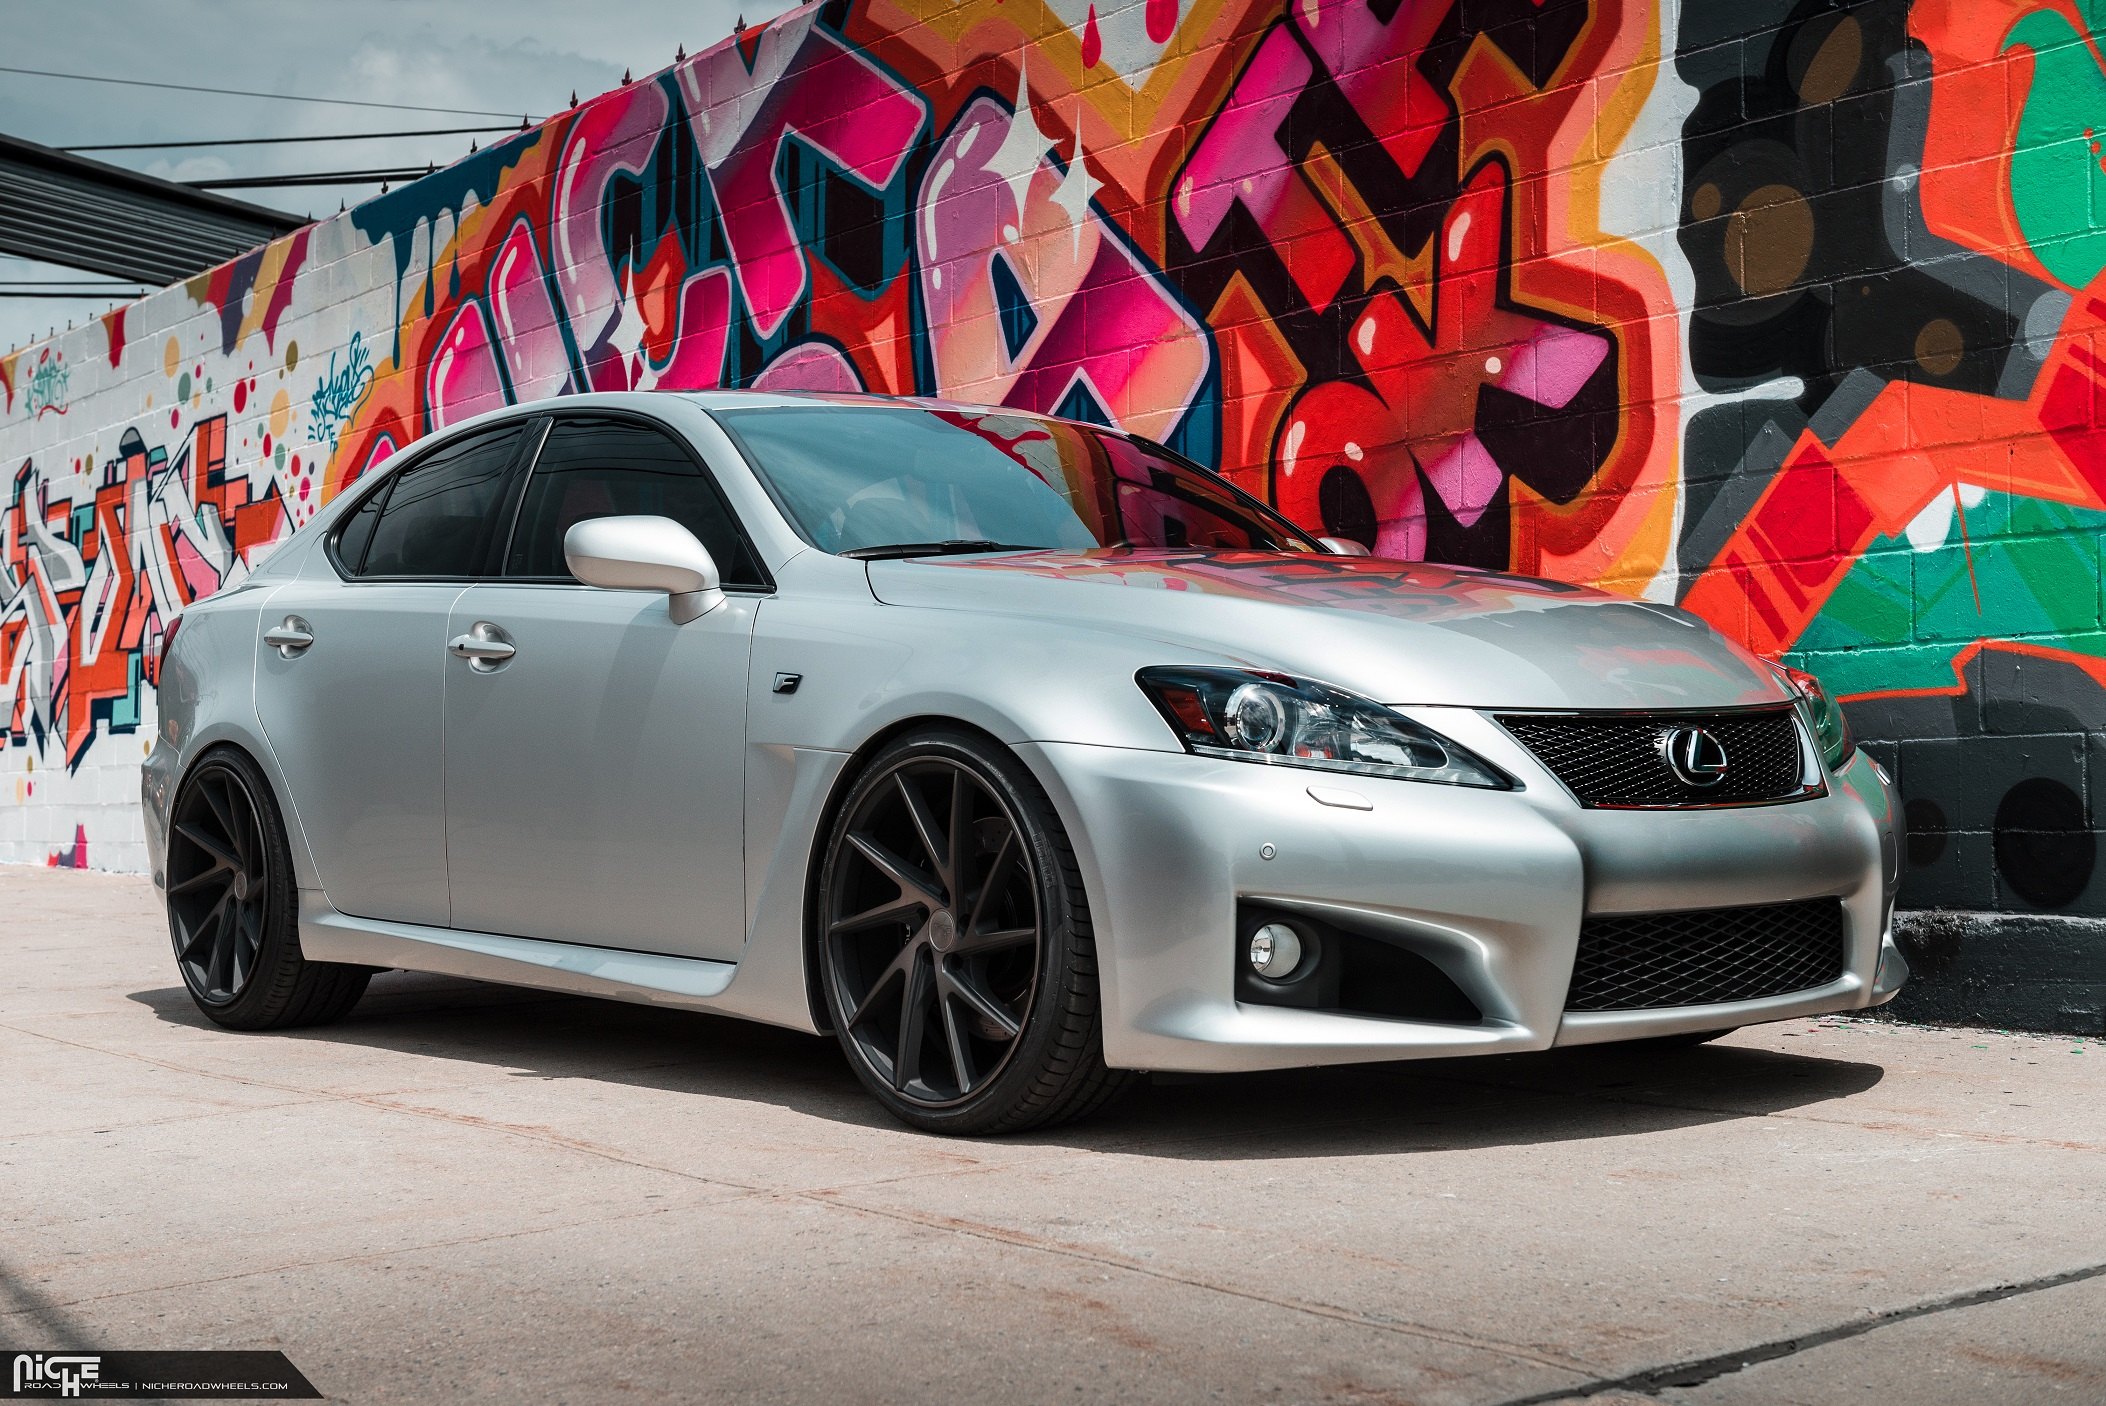 Silver Lexus IS with Chrome Mesh Grille - Photo by Niche